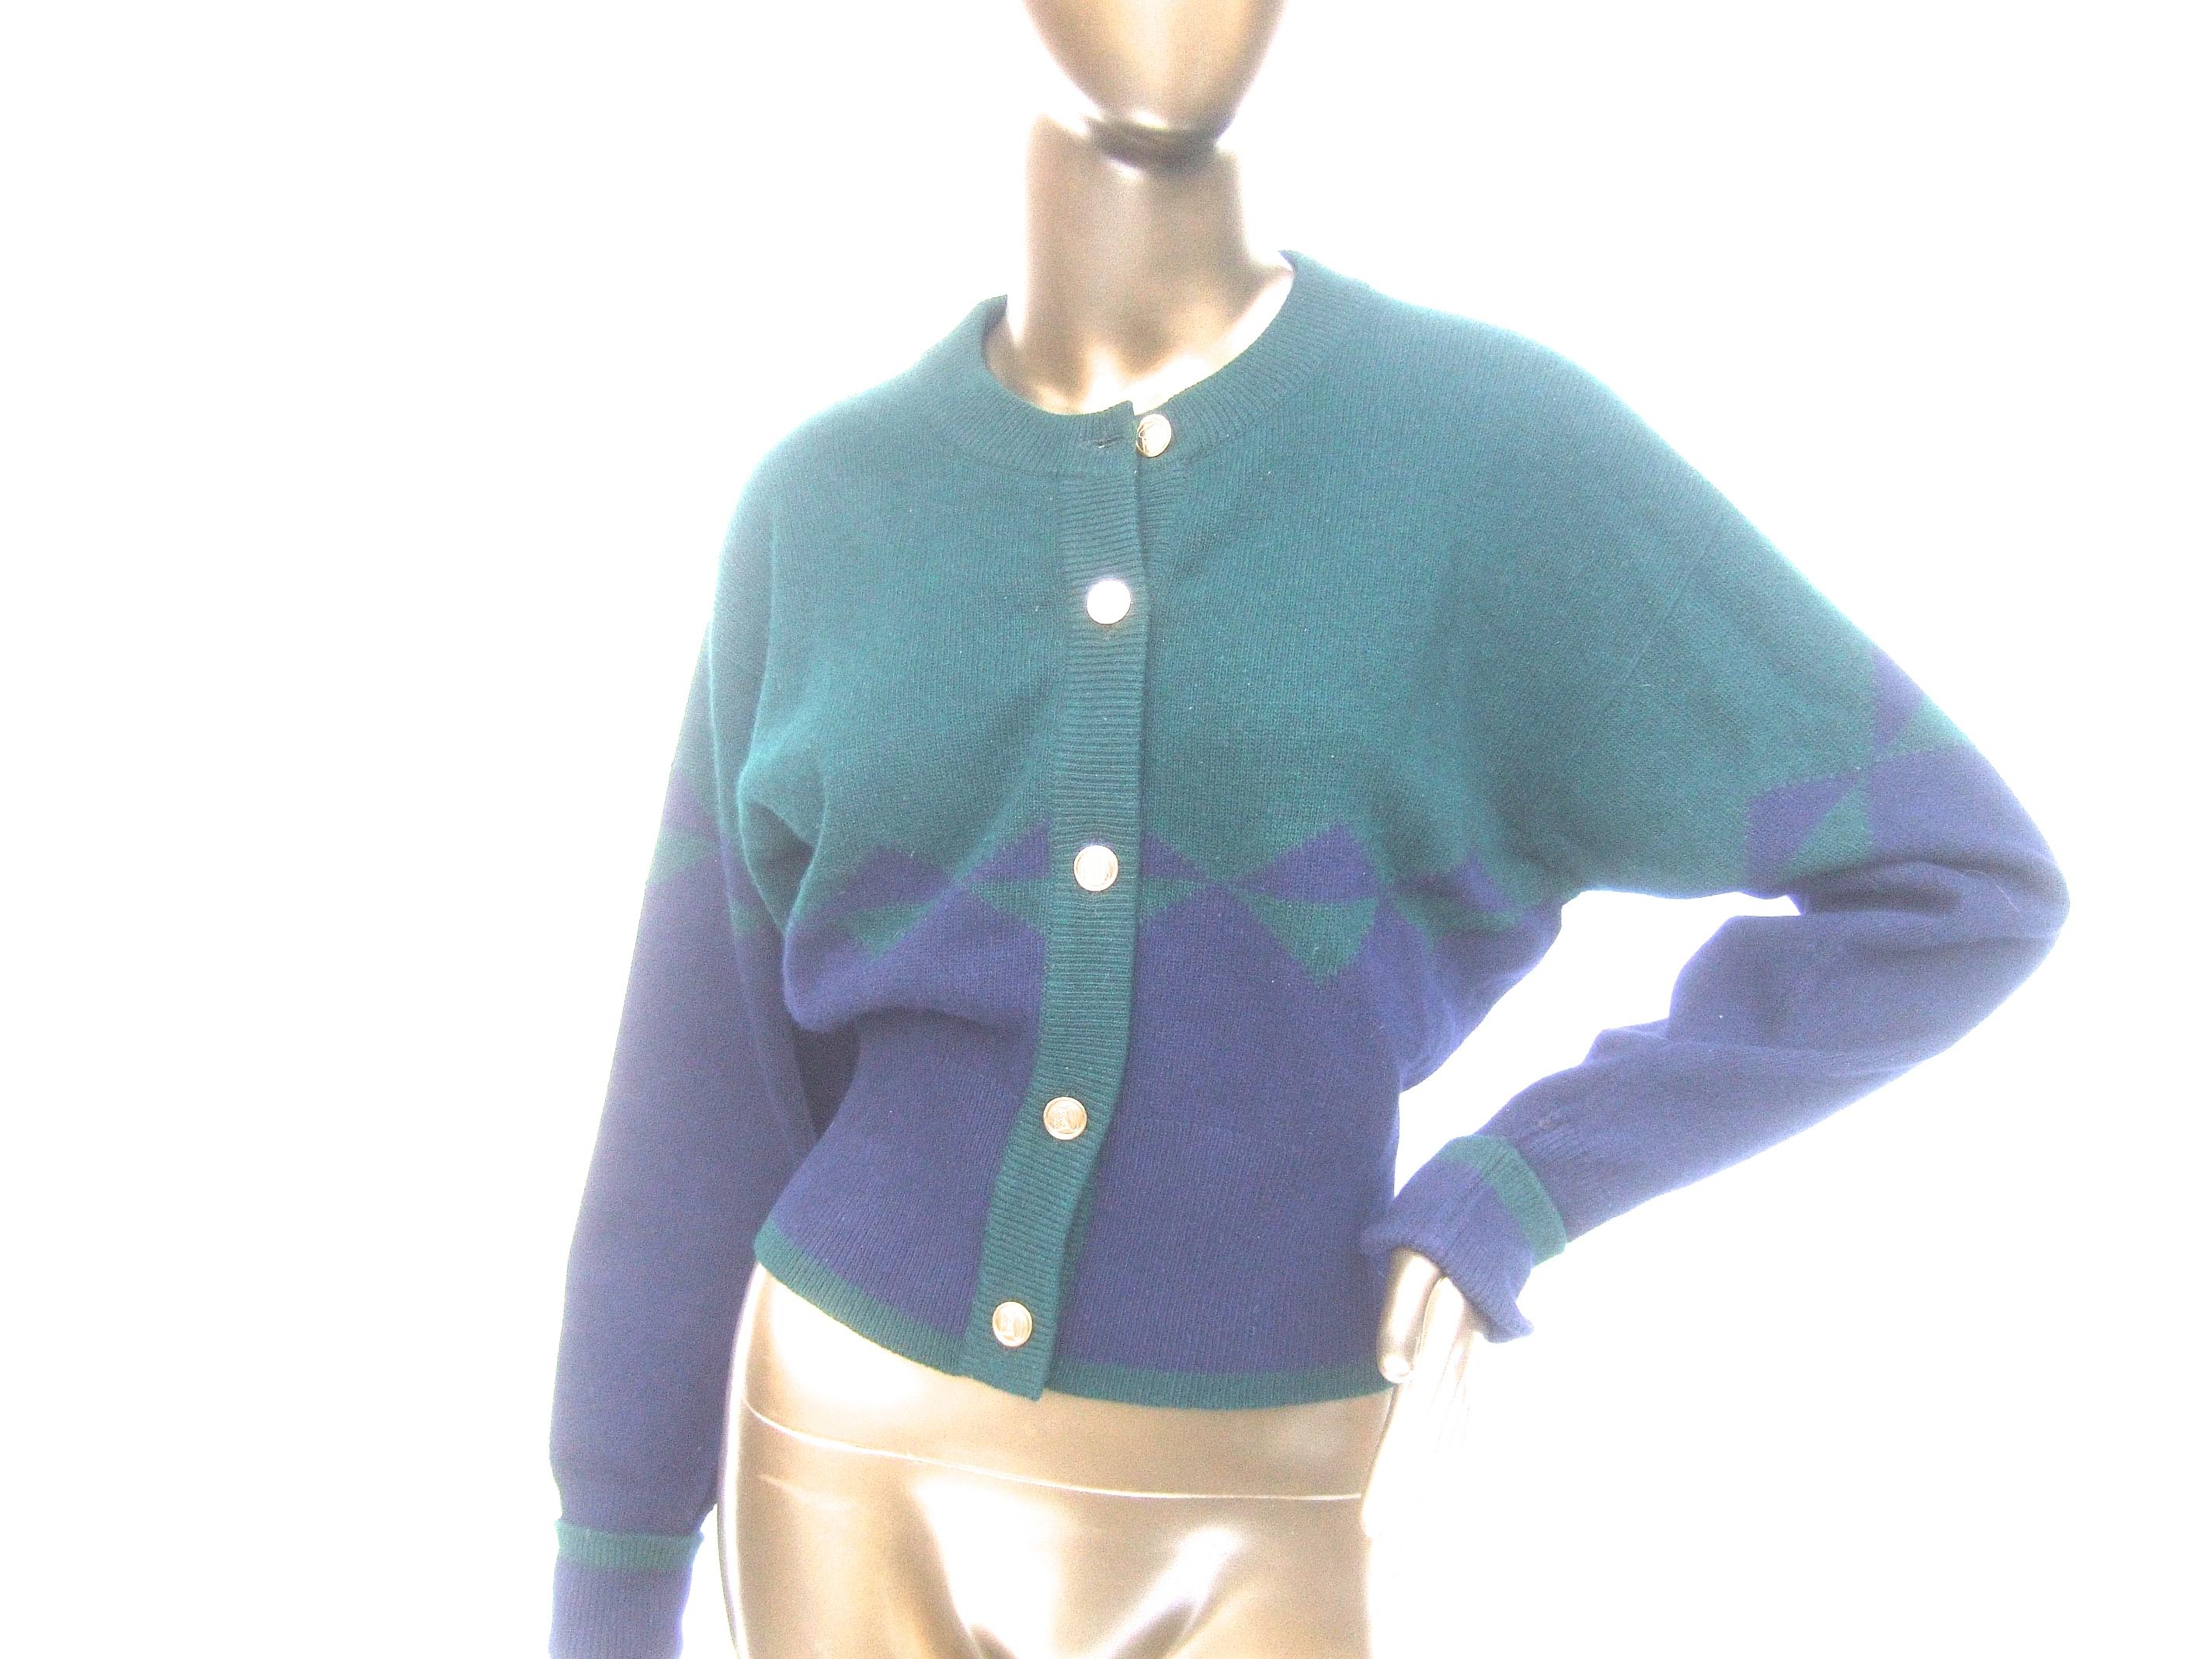 Chanel Luxurious cashmere blue & green gilt logo button cardigan c. 1990 
The stylish Chanel cardigan is constructed with plush double-ply cashmere 
The cashmere cardigan is designed with a combination of dark hunter green
cashmere juxtaposed with